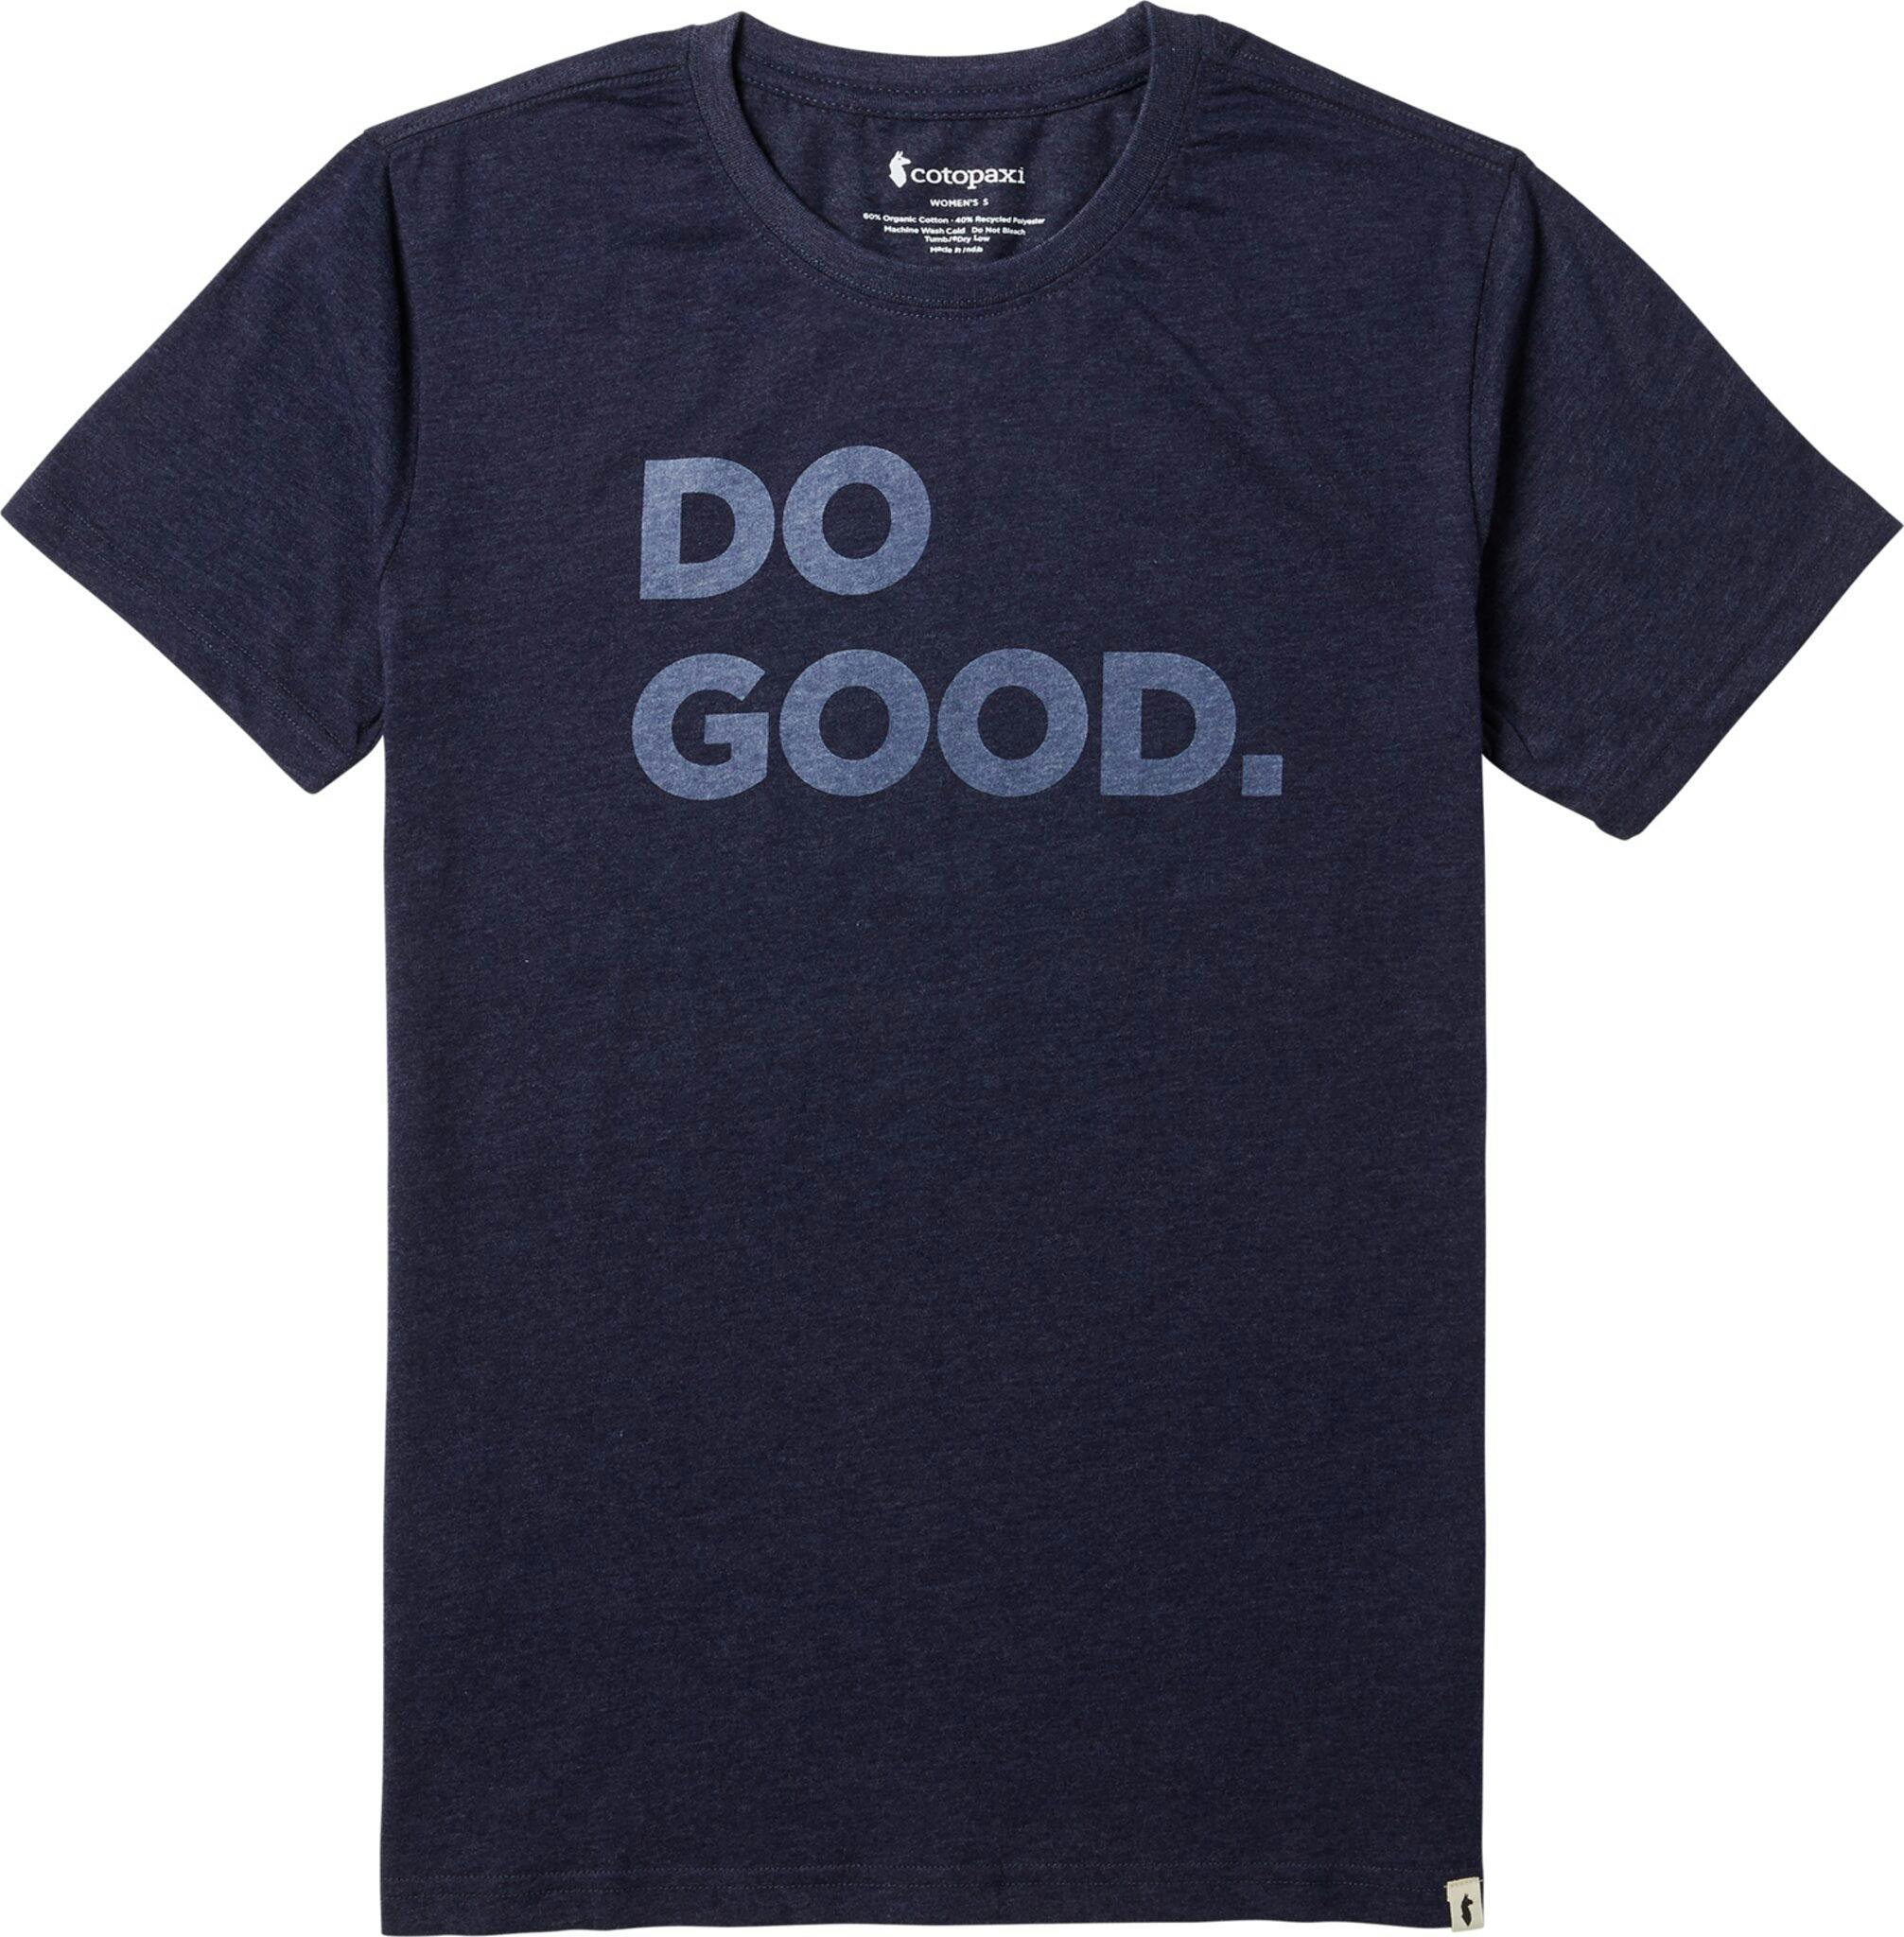 Product image for Do Good T-Shirt - Women's